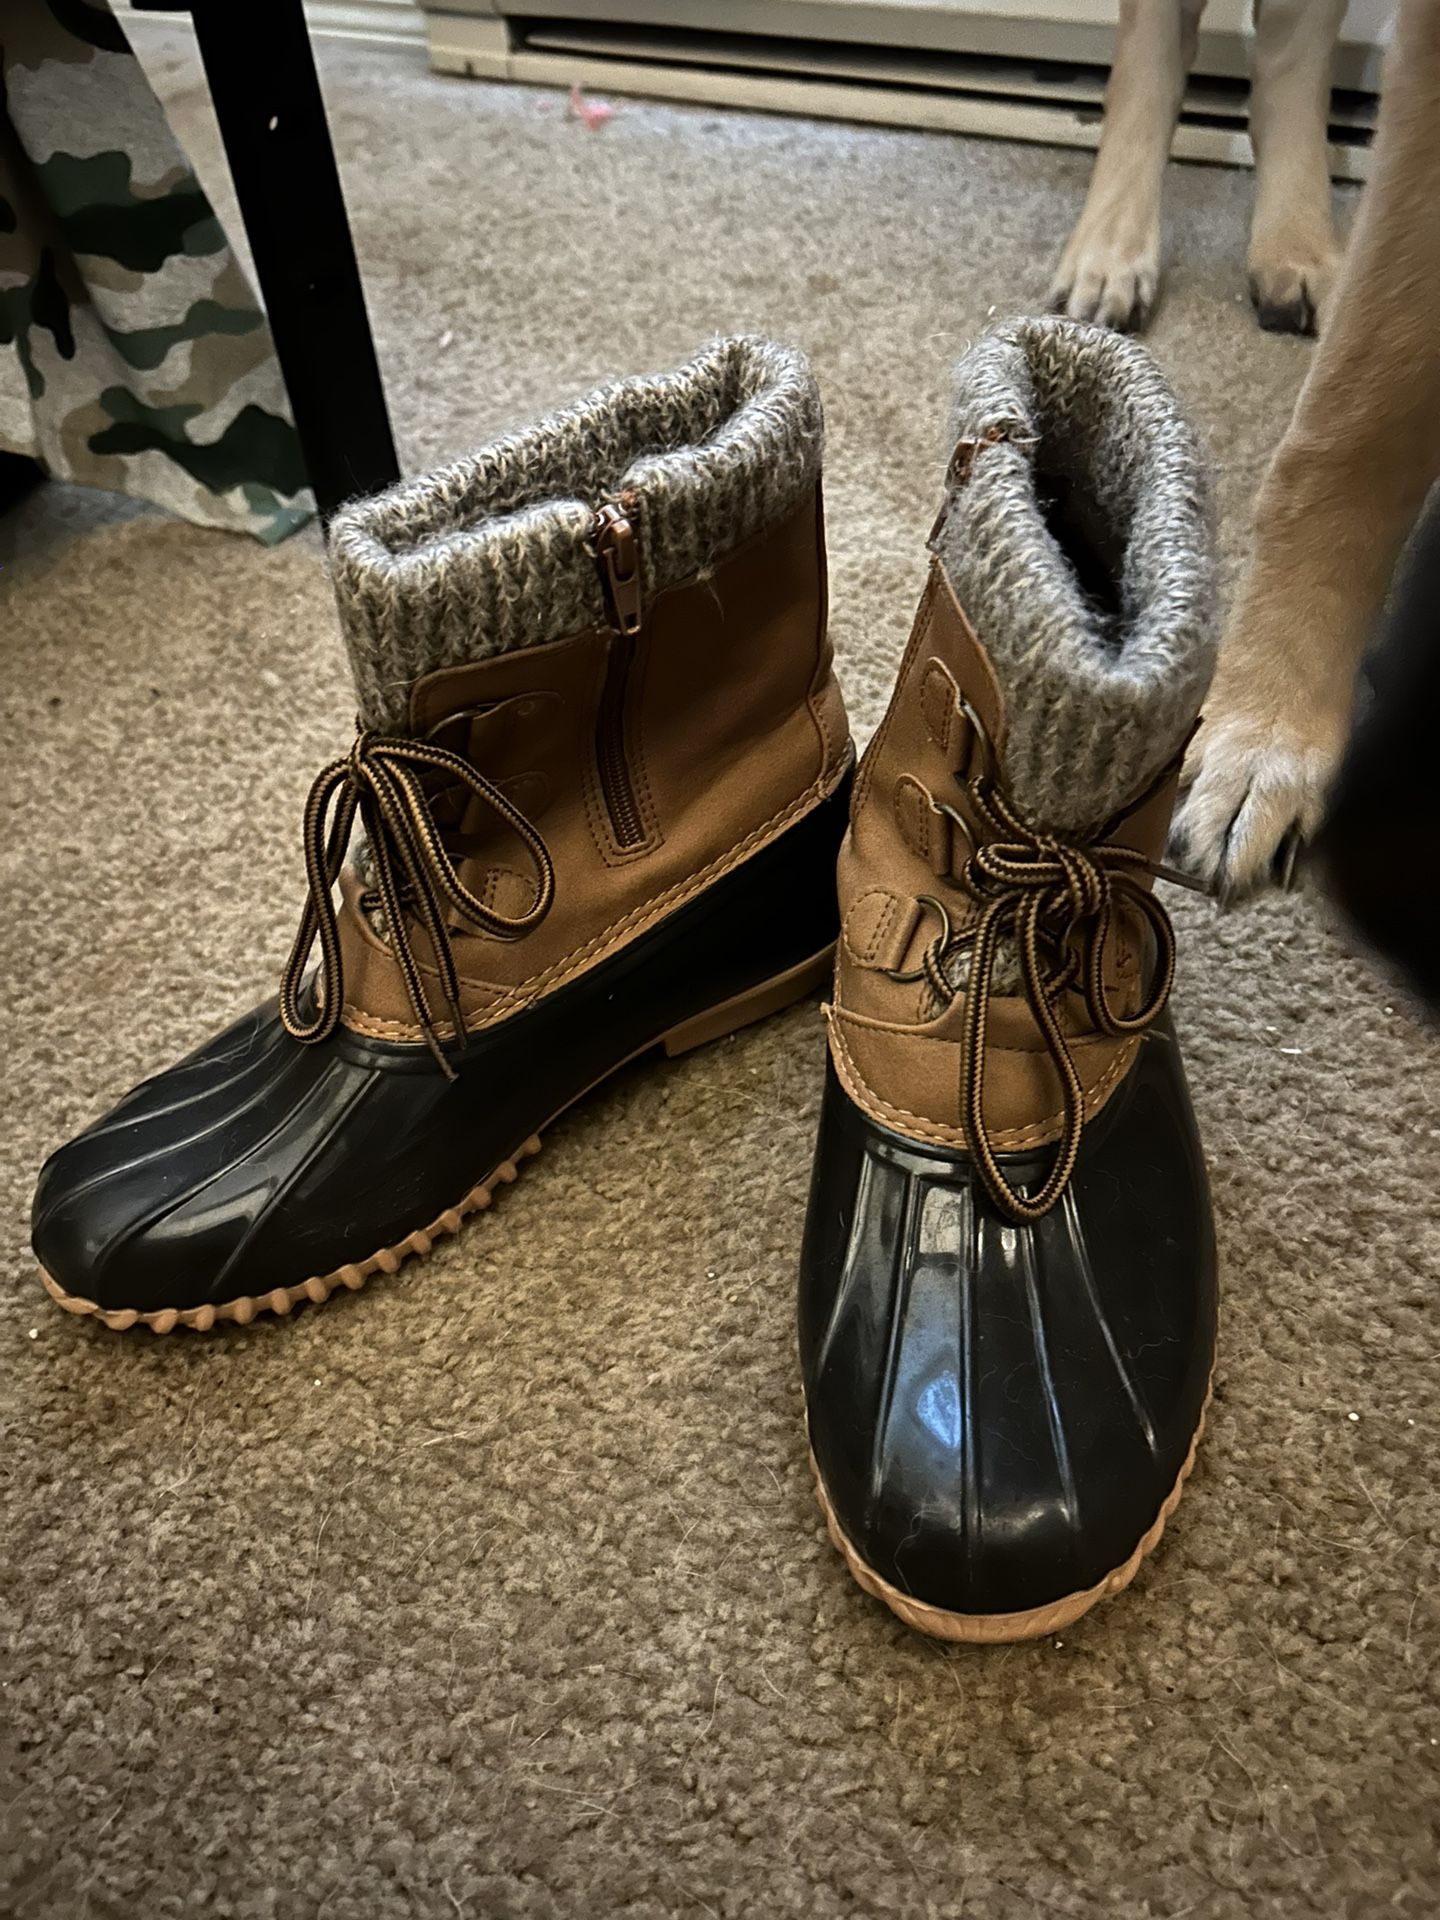 Snow/Hiking Boots